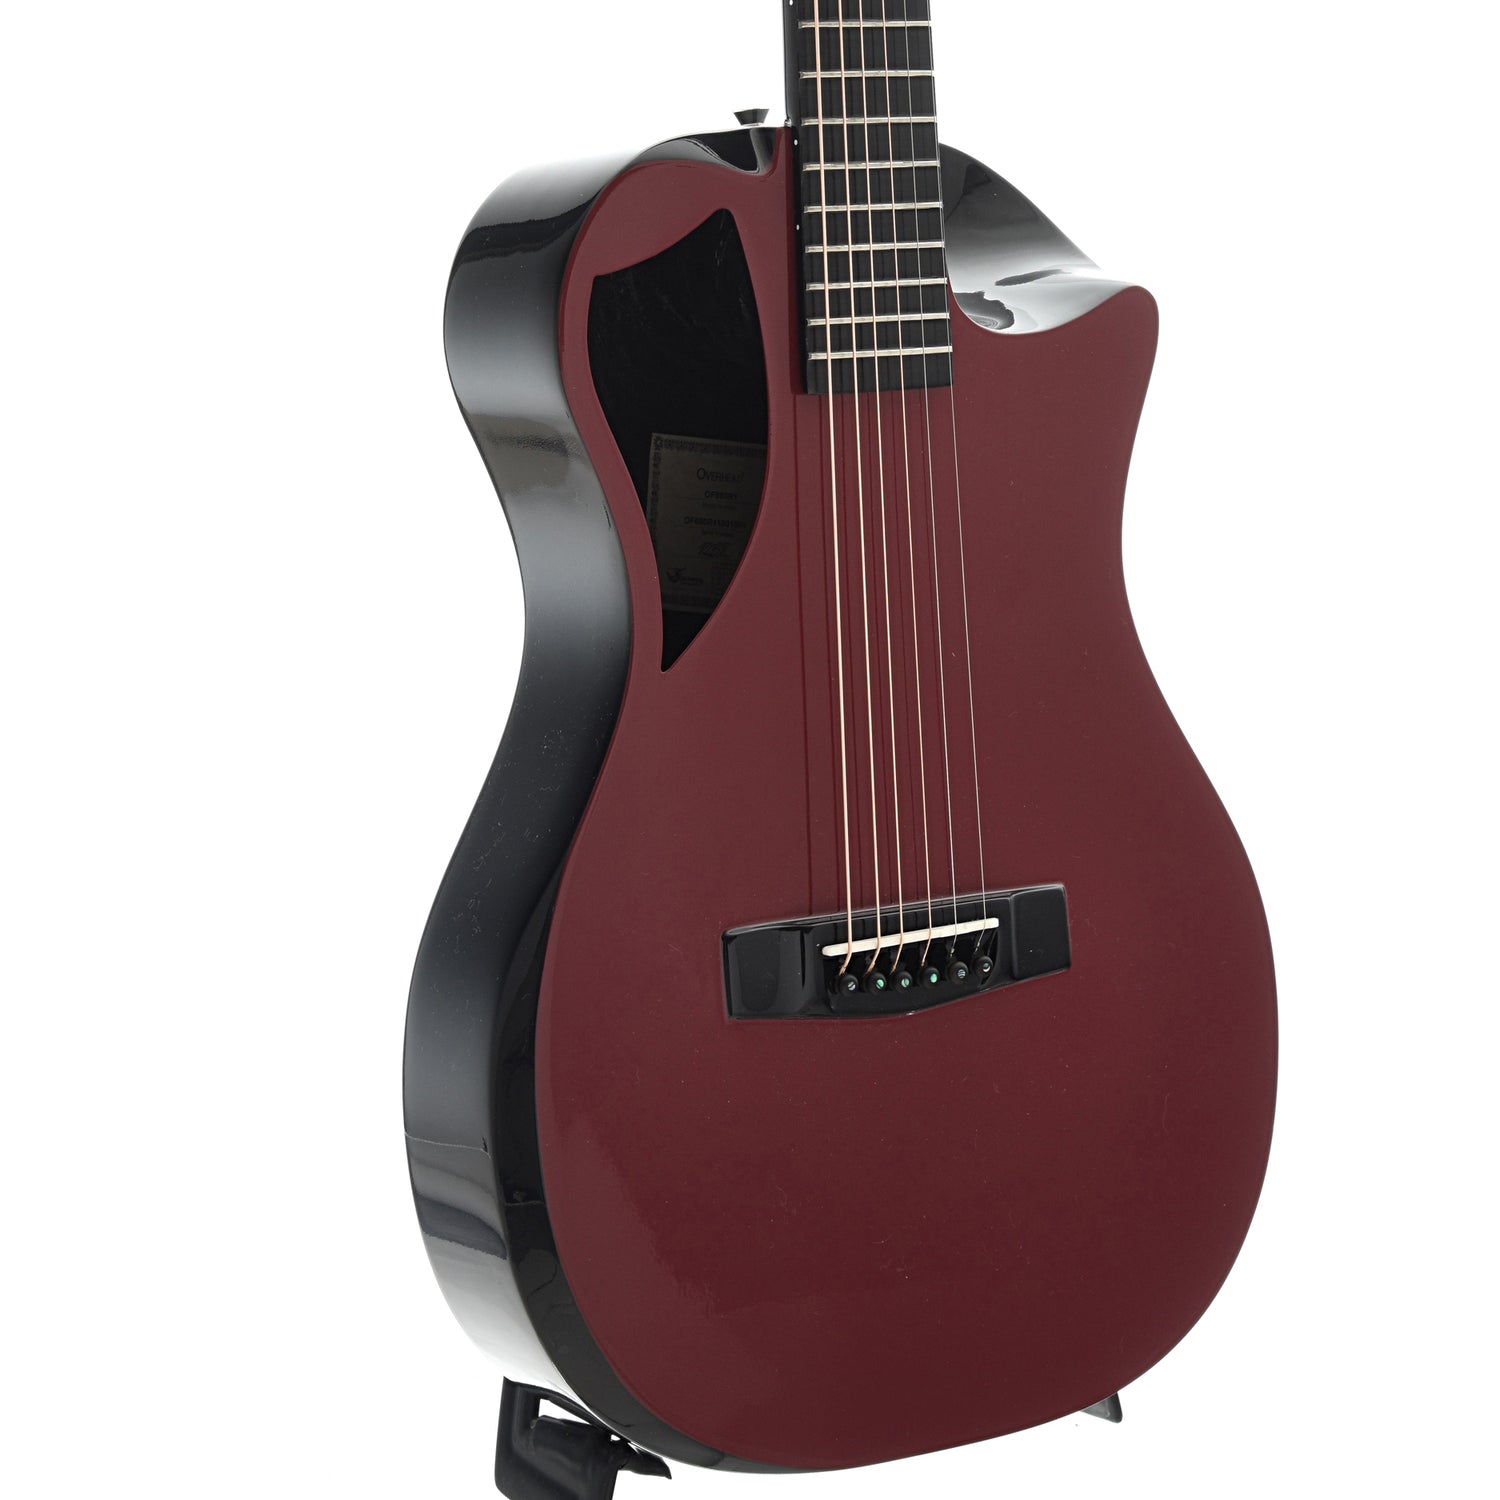 Image 2 of Journey Instruments OF660 Carbon Fiber Collapsible Travel Guitar with Gigbag, Burgandy Red Top - SKU# OF660CT-R : Product Type Flat-top Guitars : Elderly Instruments